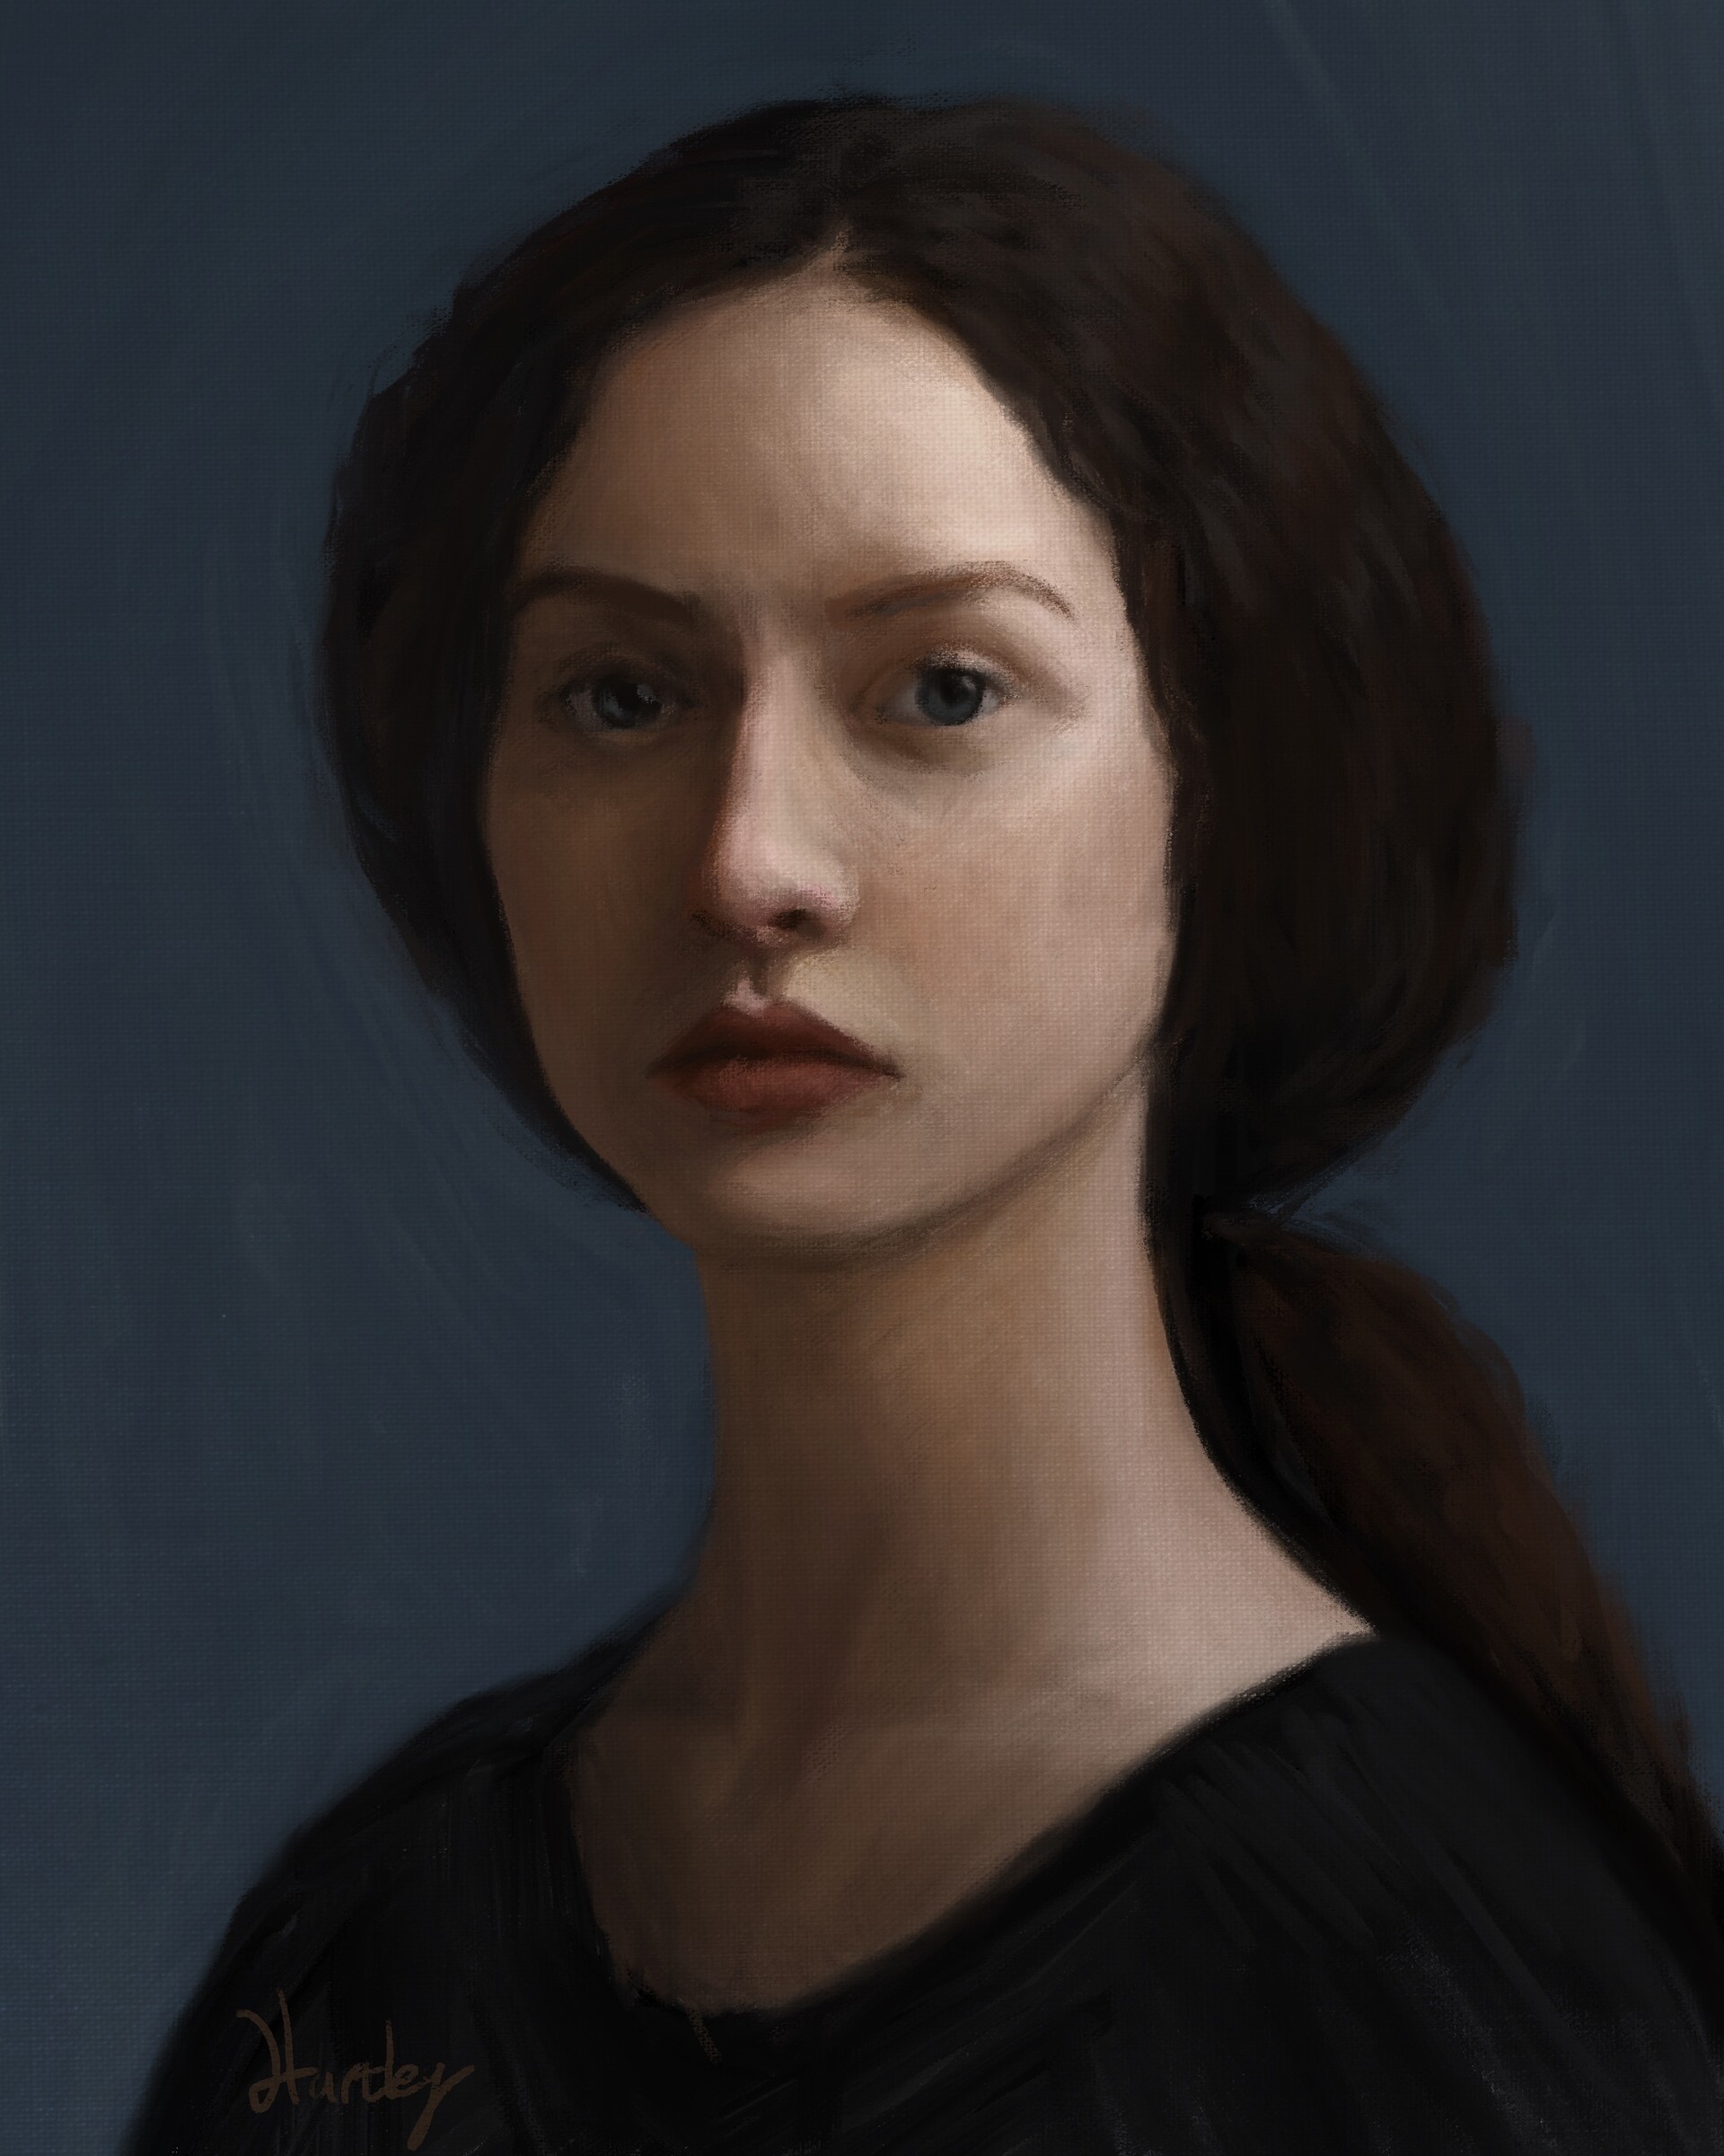 ArtStation - Portrait of a young woman